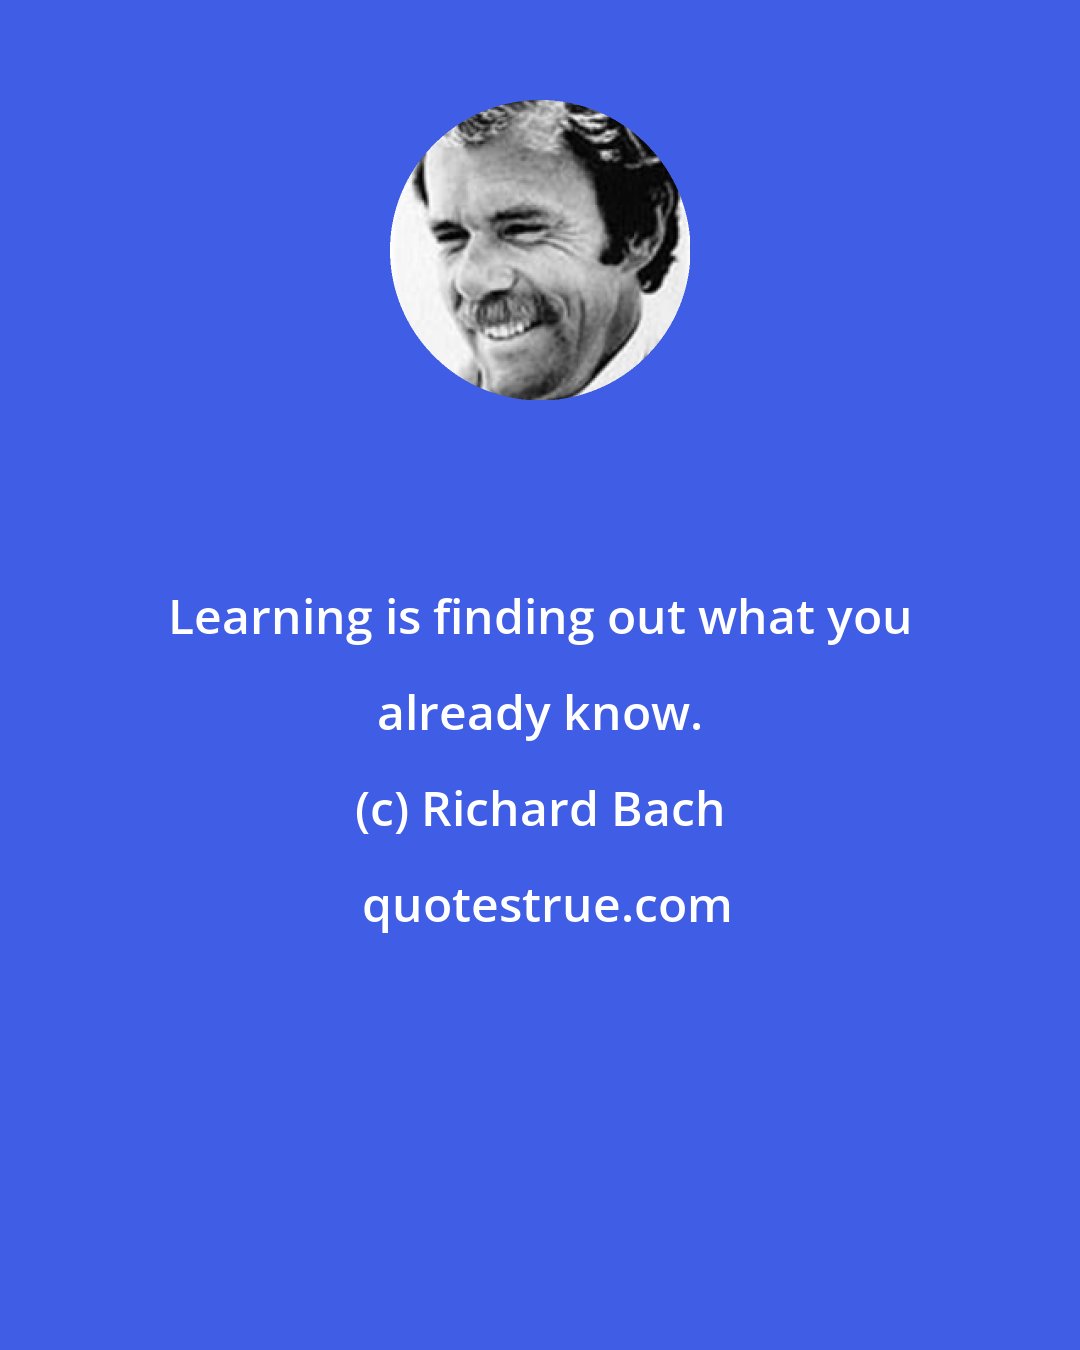 Richard Bach: Learning is finding out what you already know.